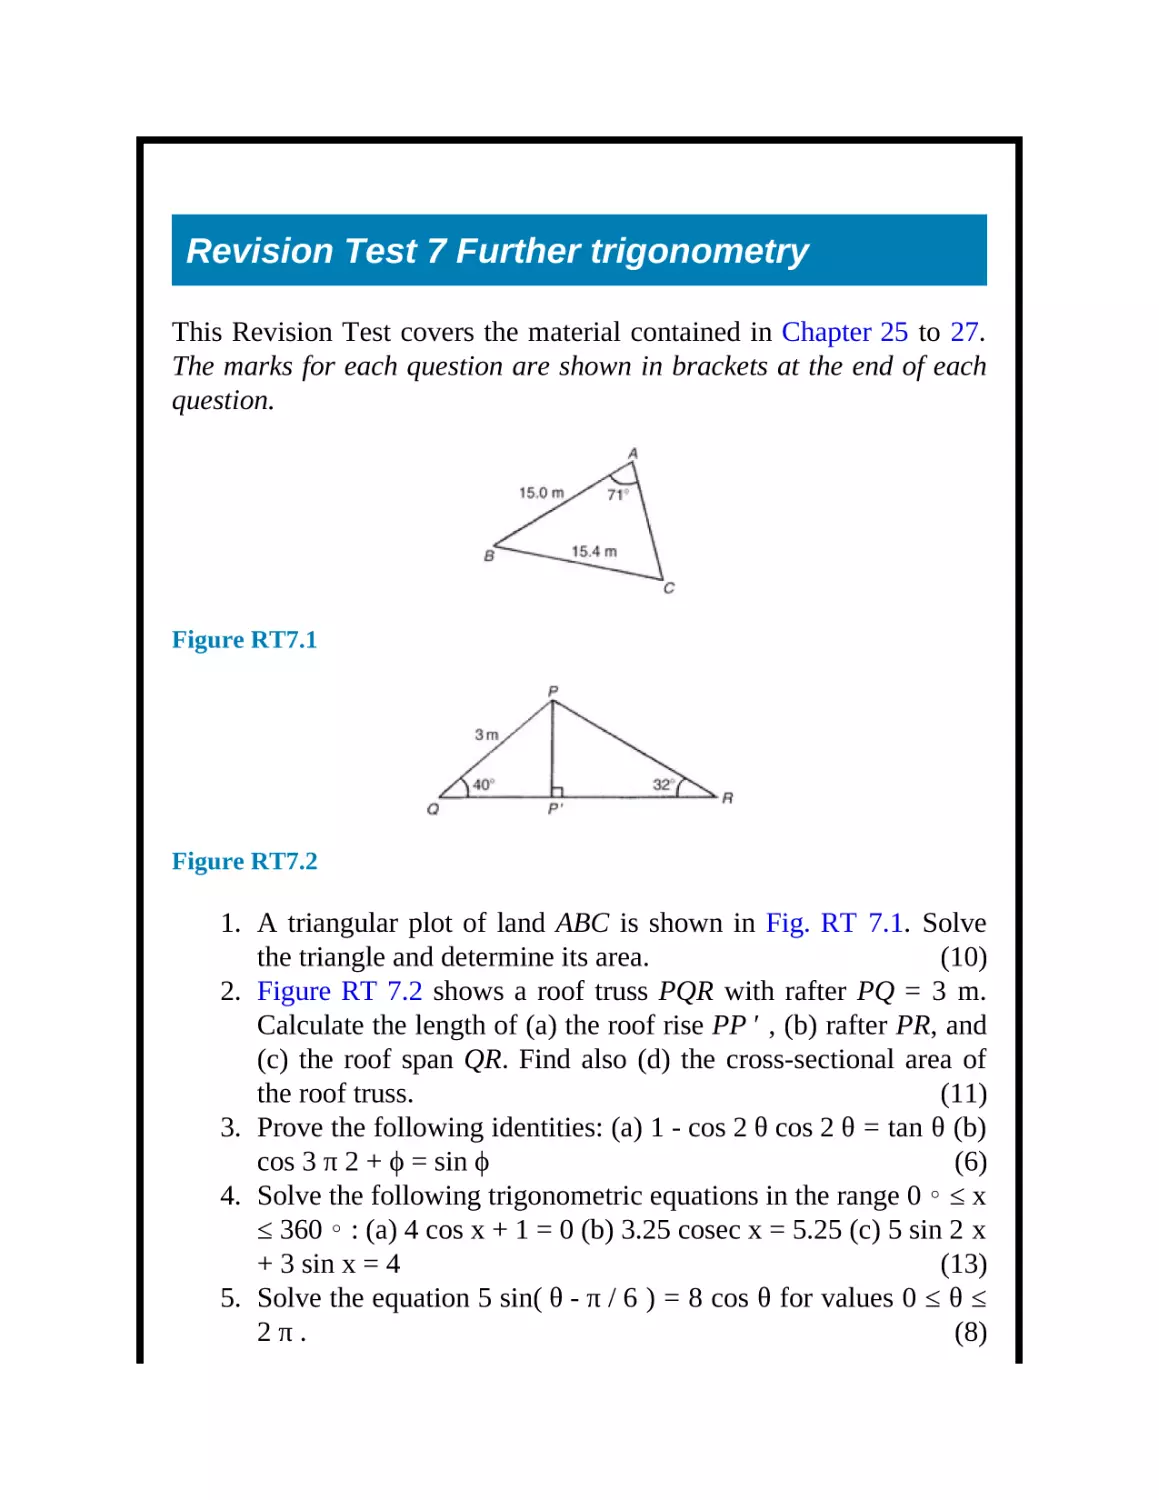 Revision Test 7